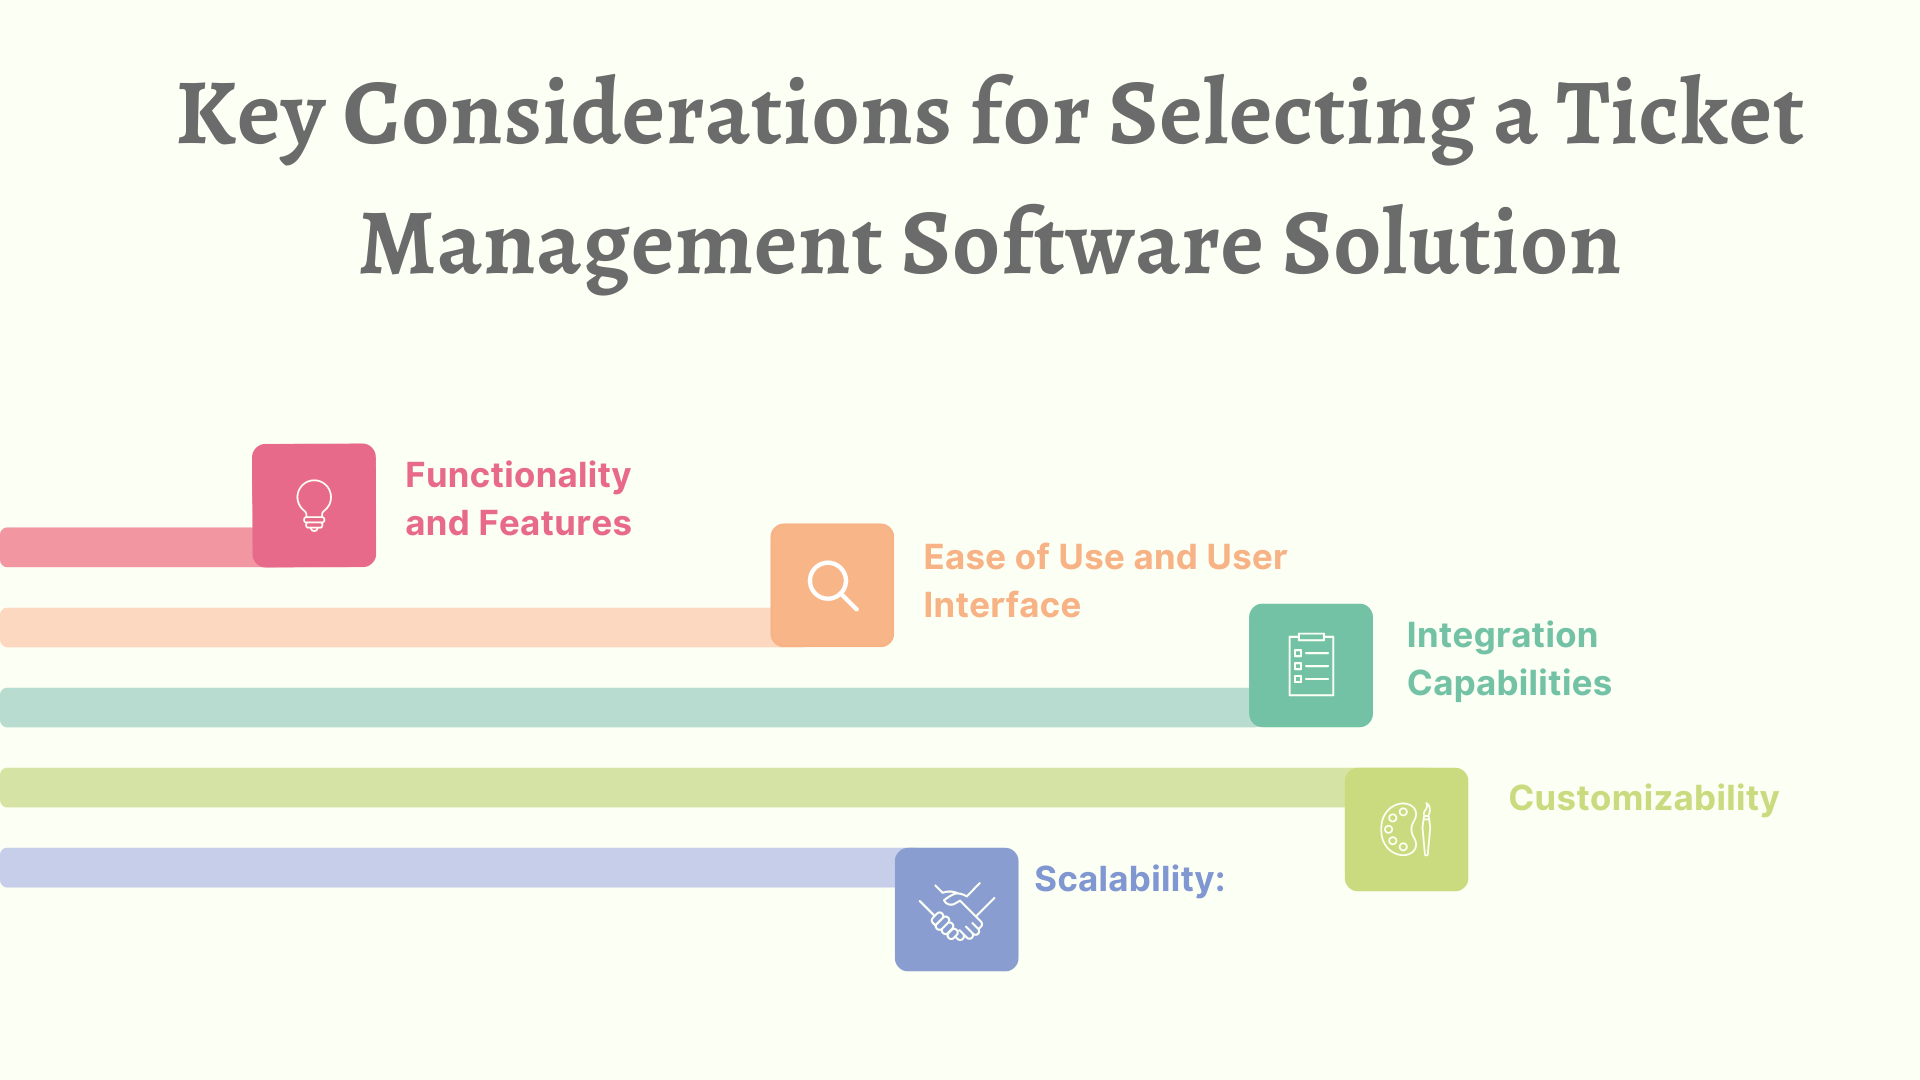 Key Considerations for Selecting a Ticket Management Software Solution